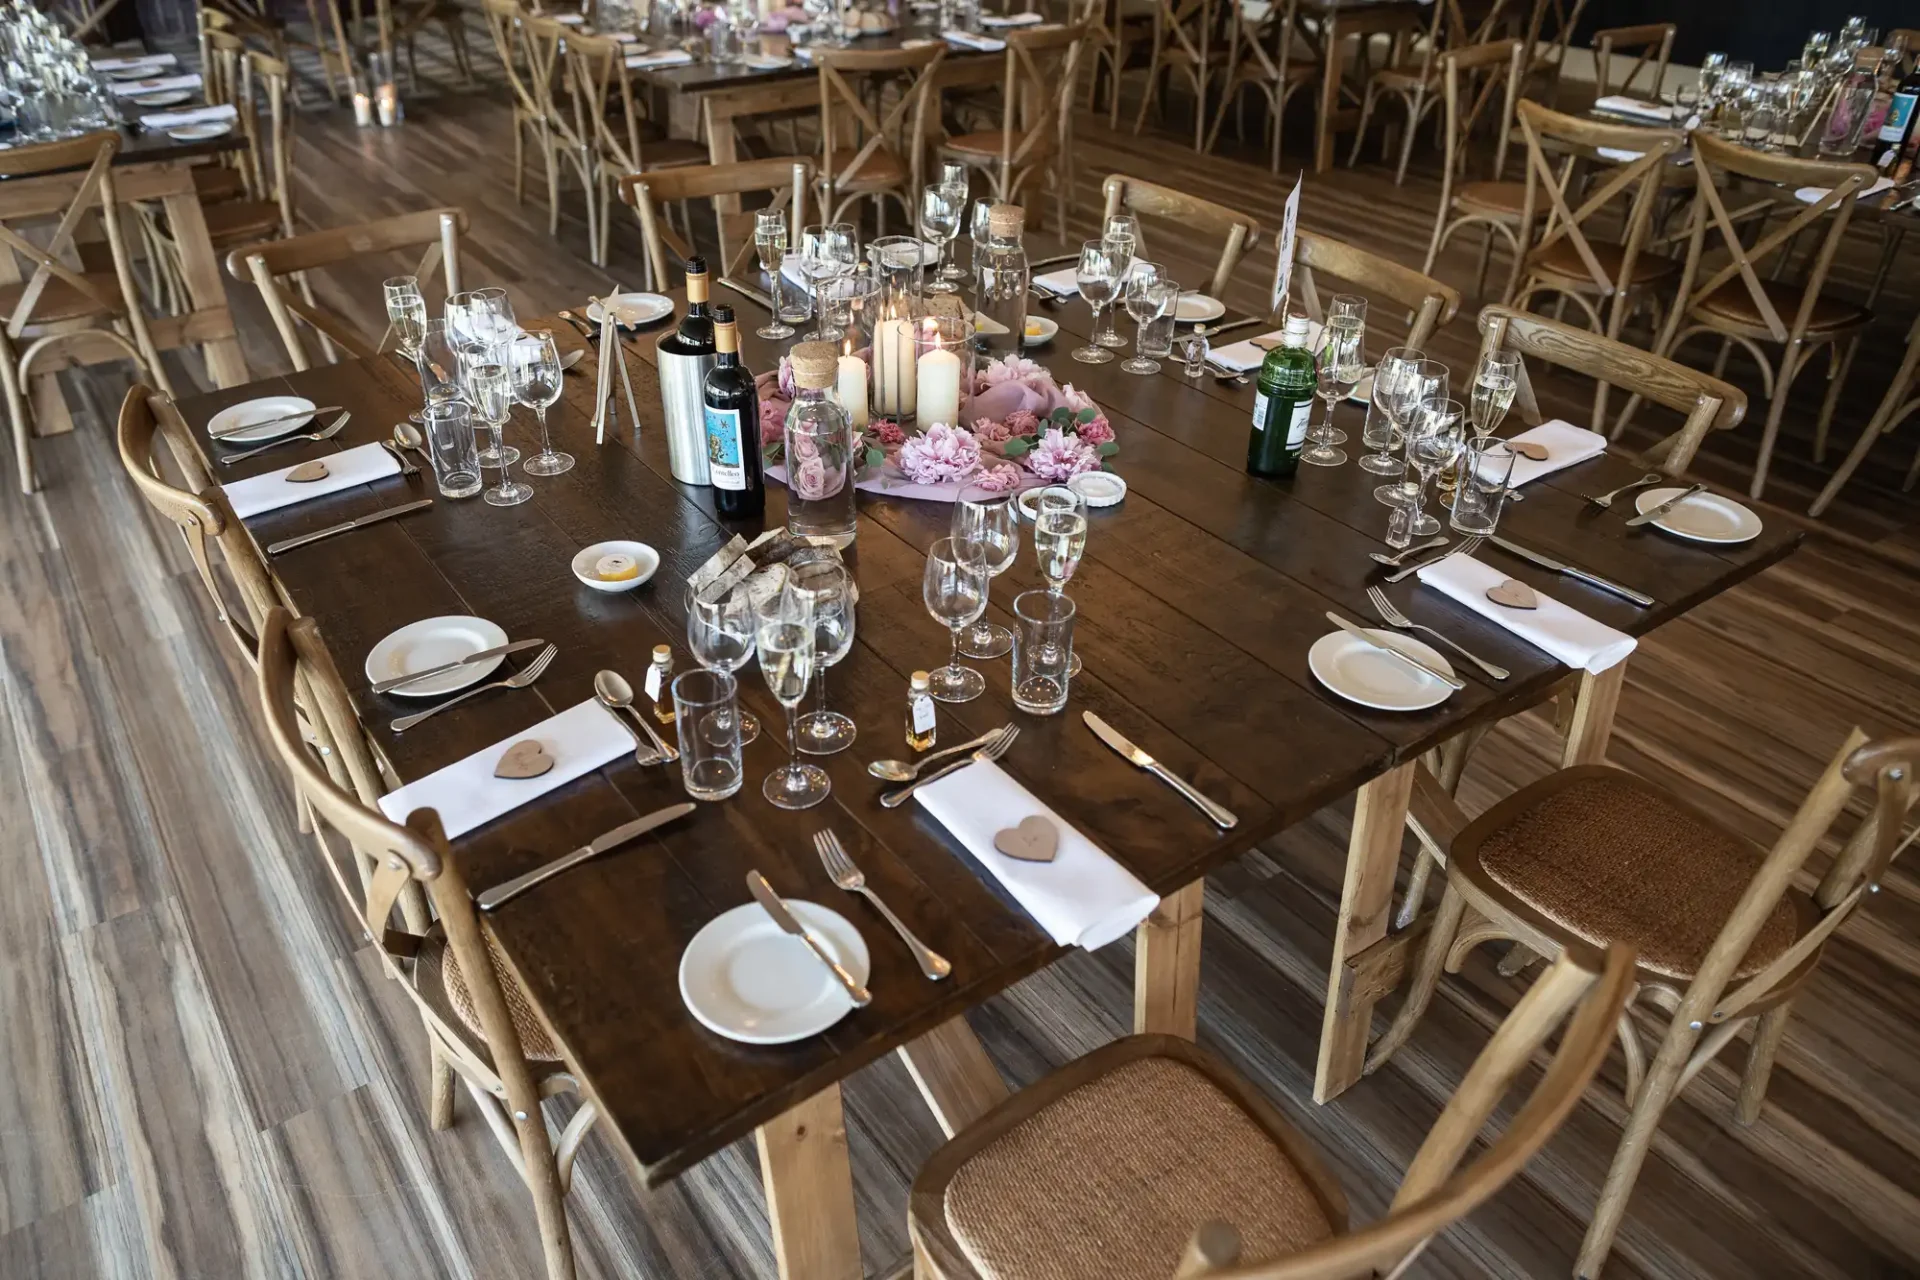 Elegantly set tables at a banquet hall with wooden chairs, floral centerpieces, candles, and dinnerware.